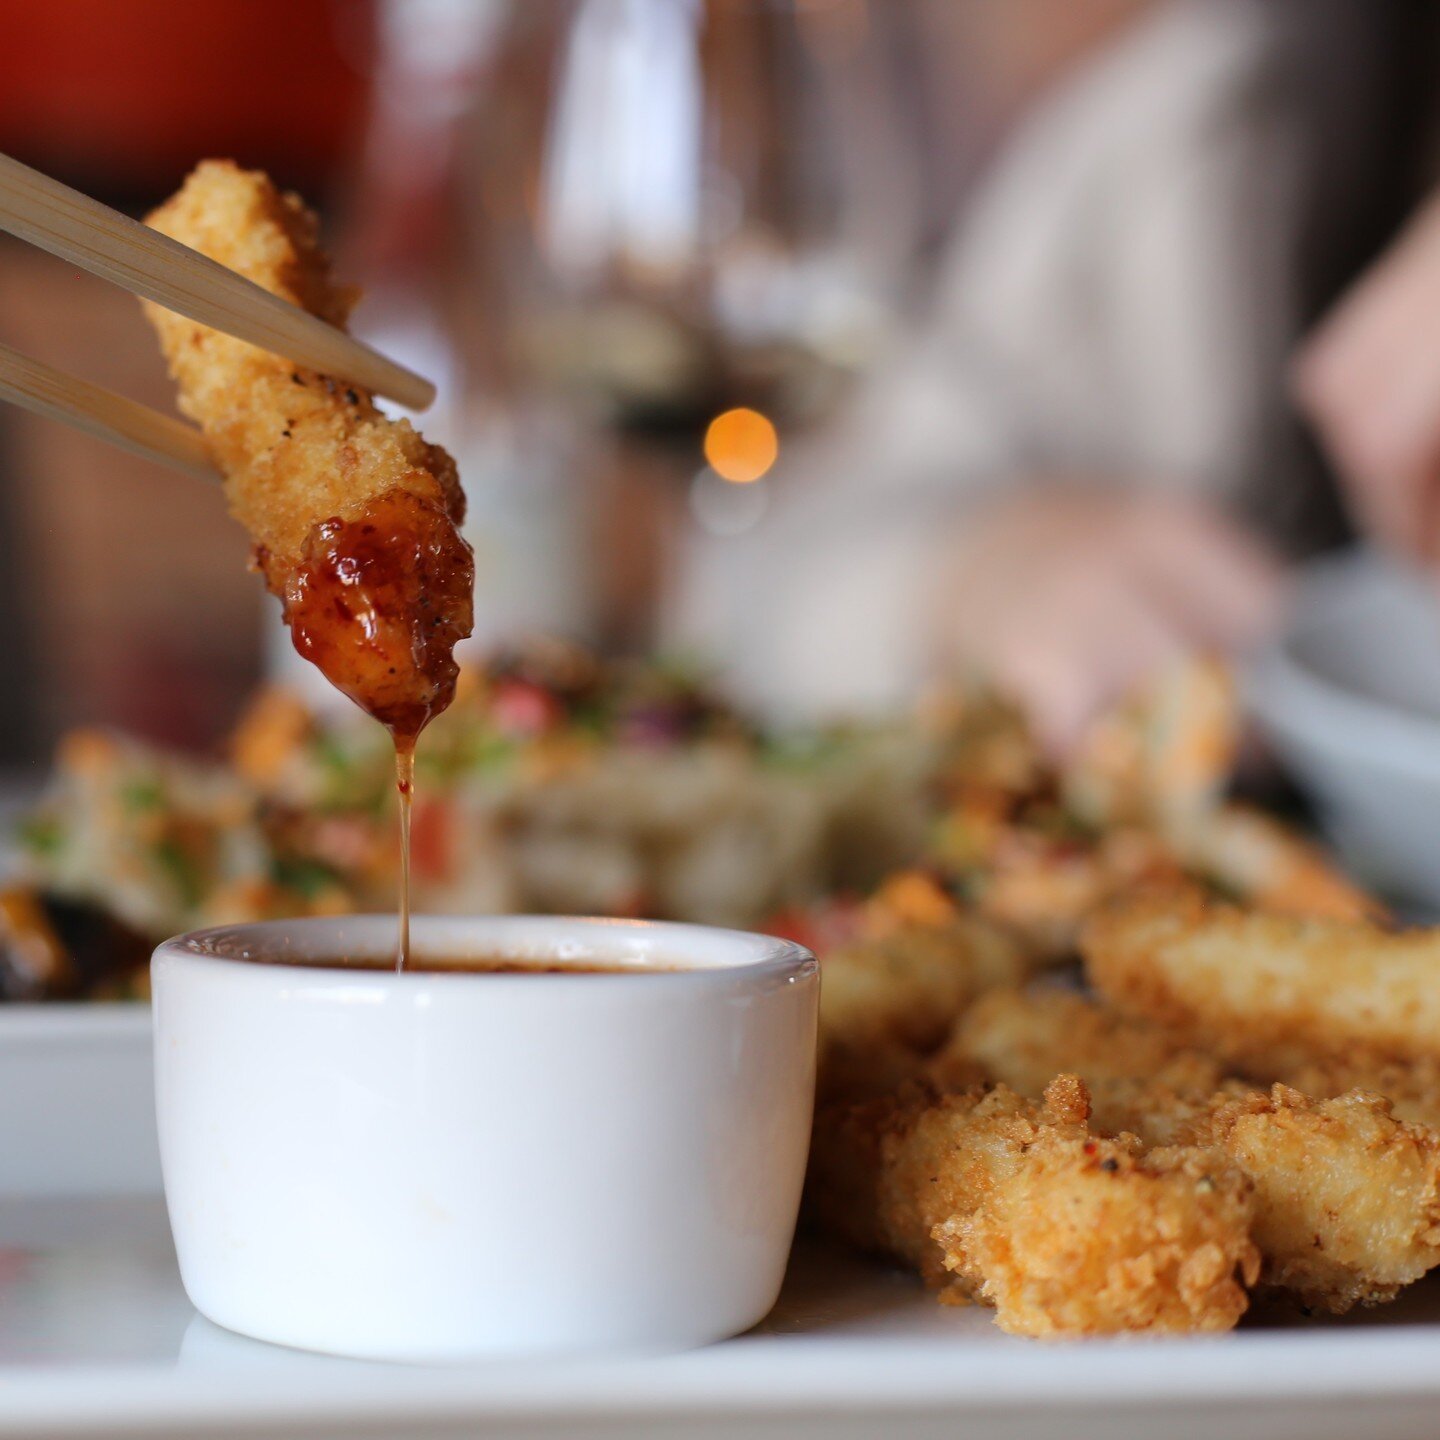 Our calamari ALWAYS hits the spot. Grab it as an app or meal and it'll become one of your favorites!